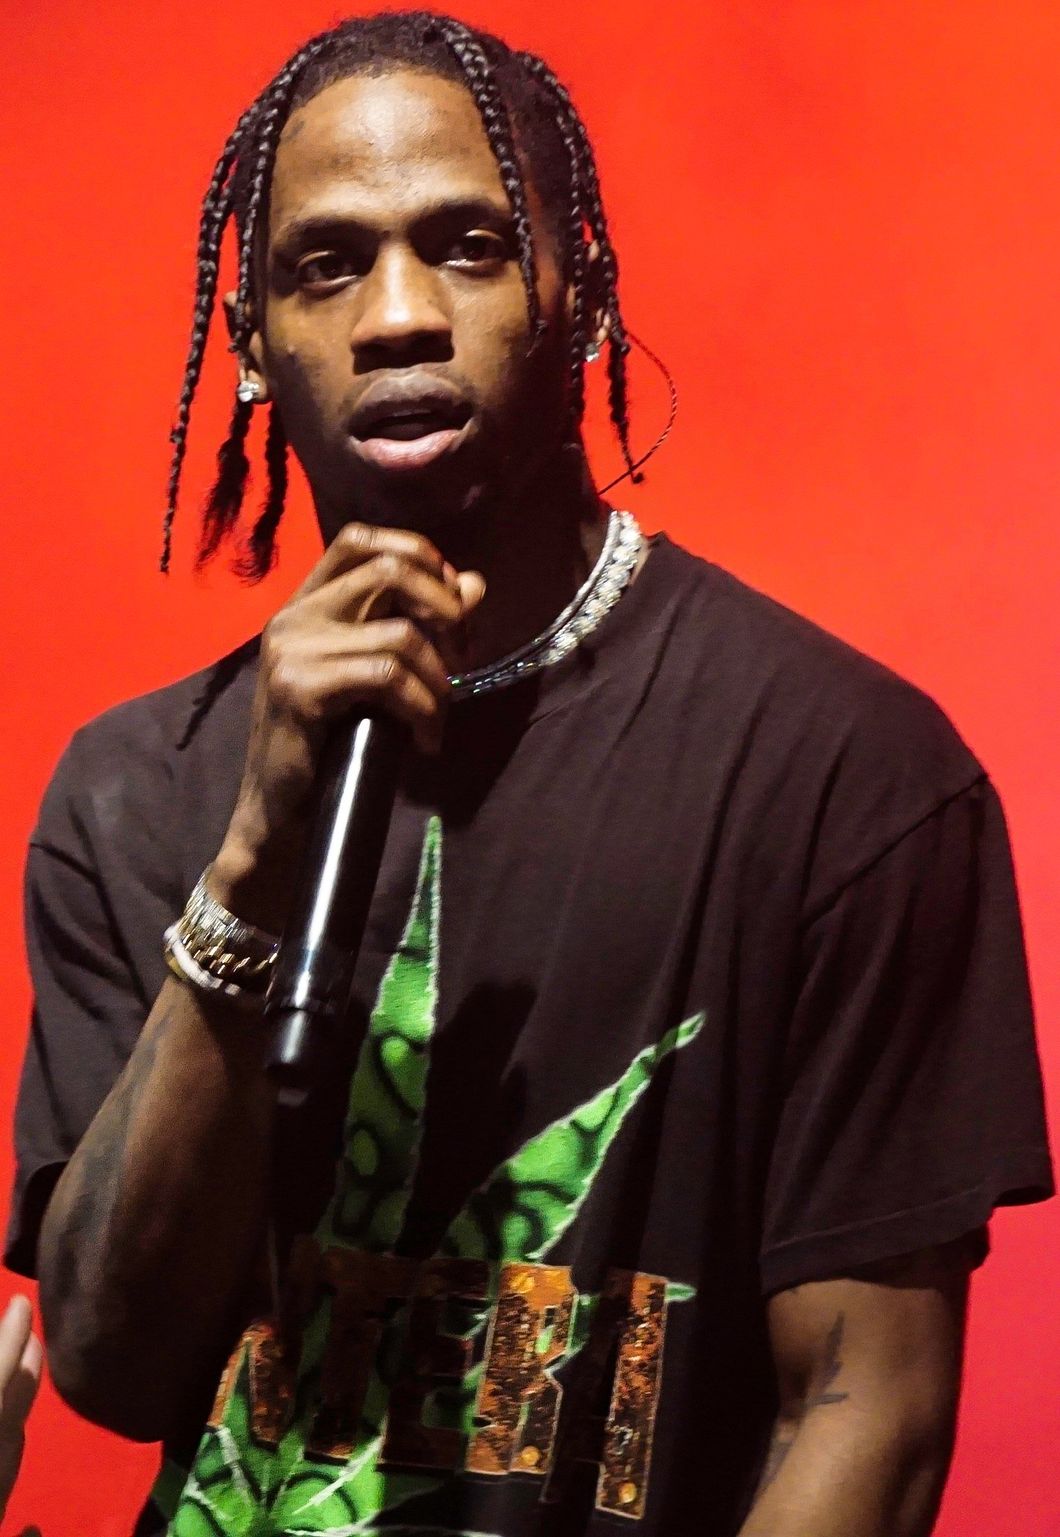 35 Lyrics From 'Astroworld' That Are Absolute Bangers